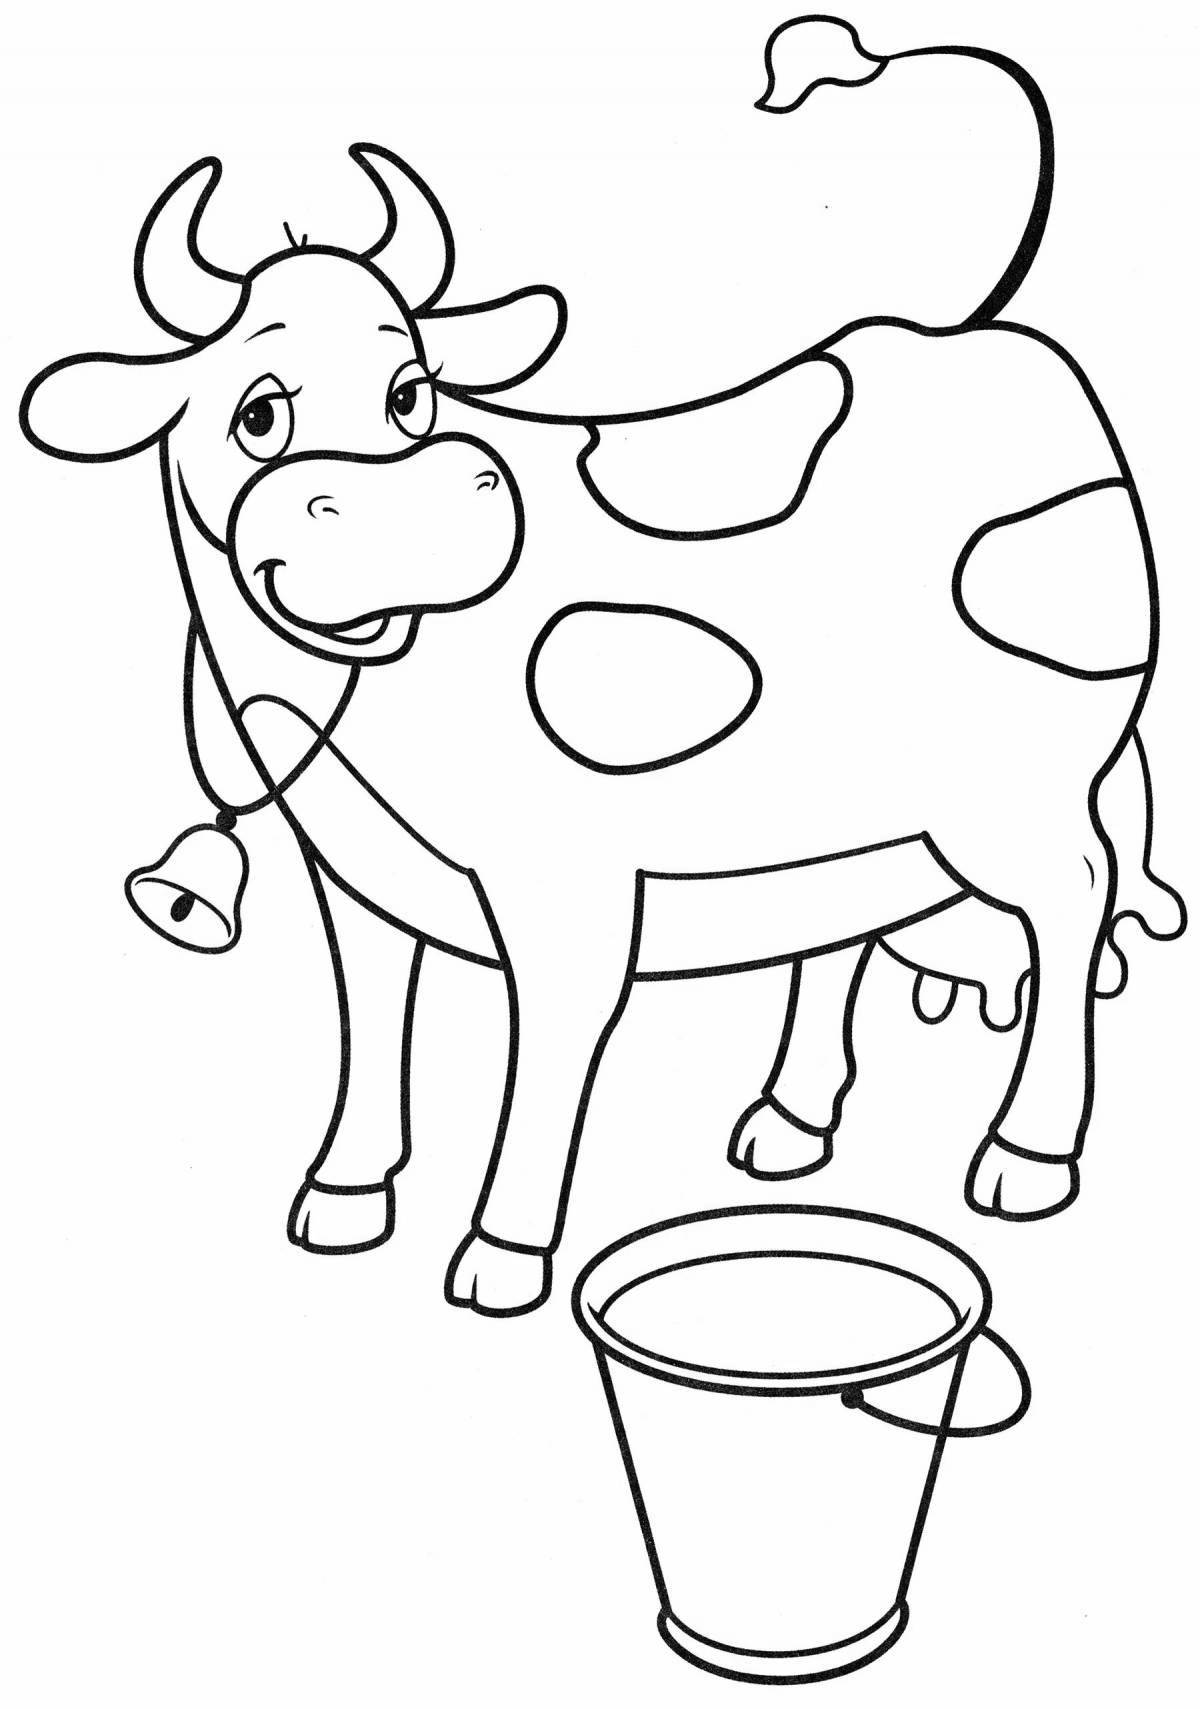 Coloring page sweet cow